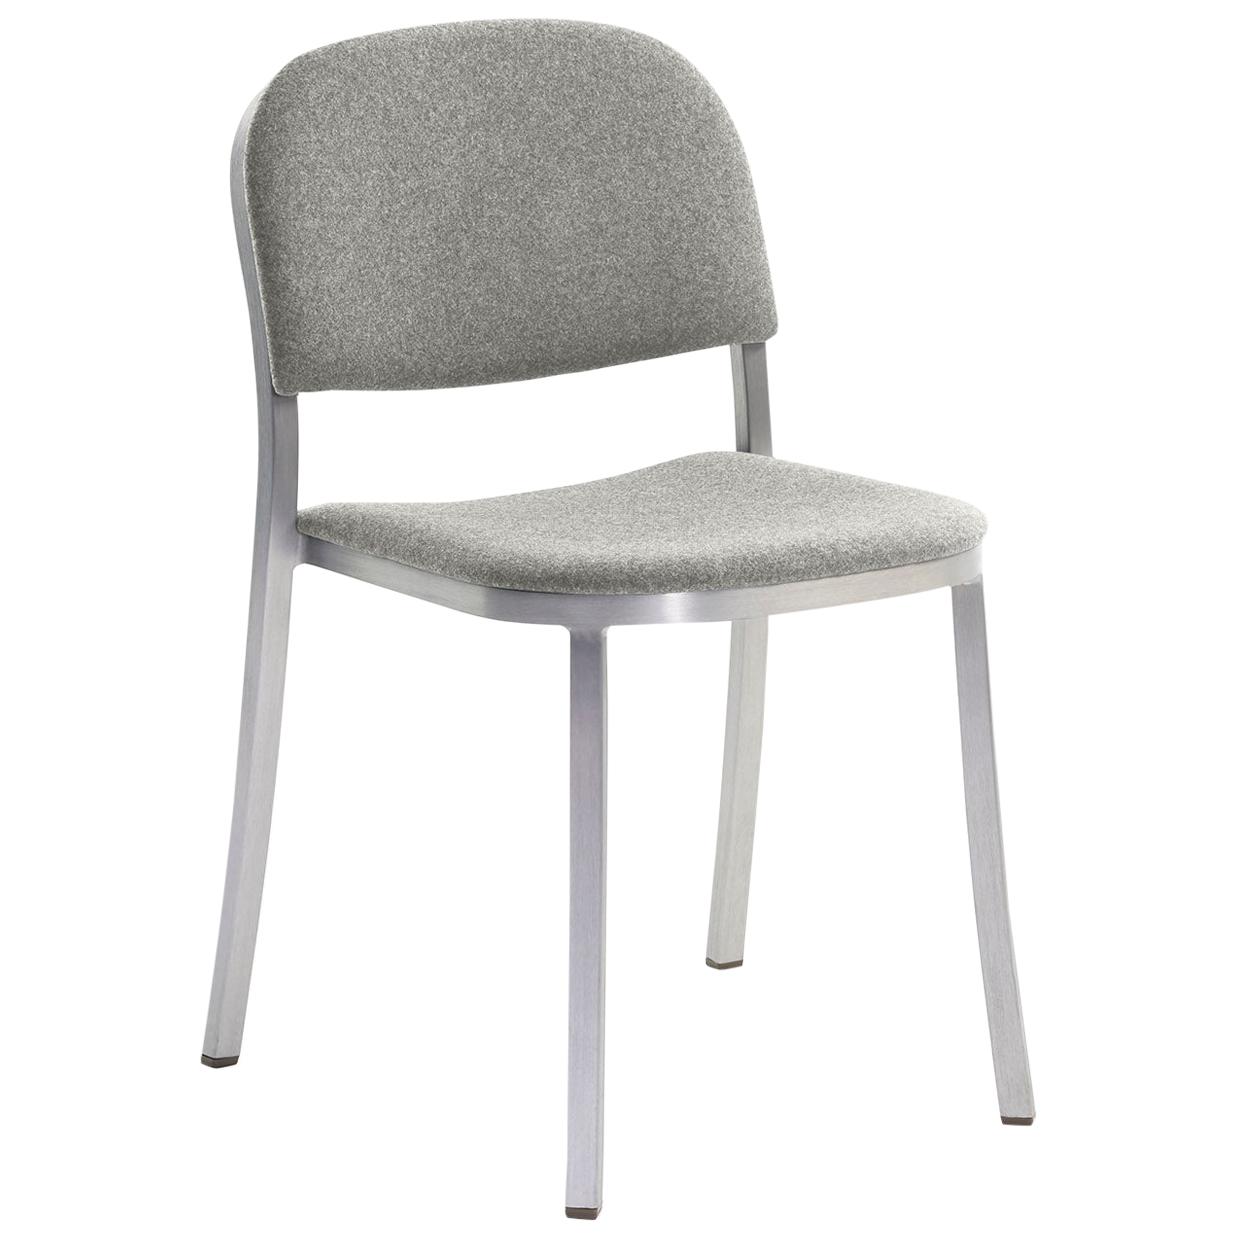 Emeco 1 Inch Stacking Chair with Grey Fabric & Aluminum Legs by Jasper Morrison